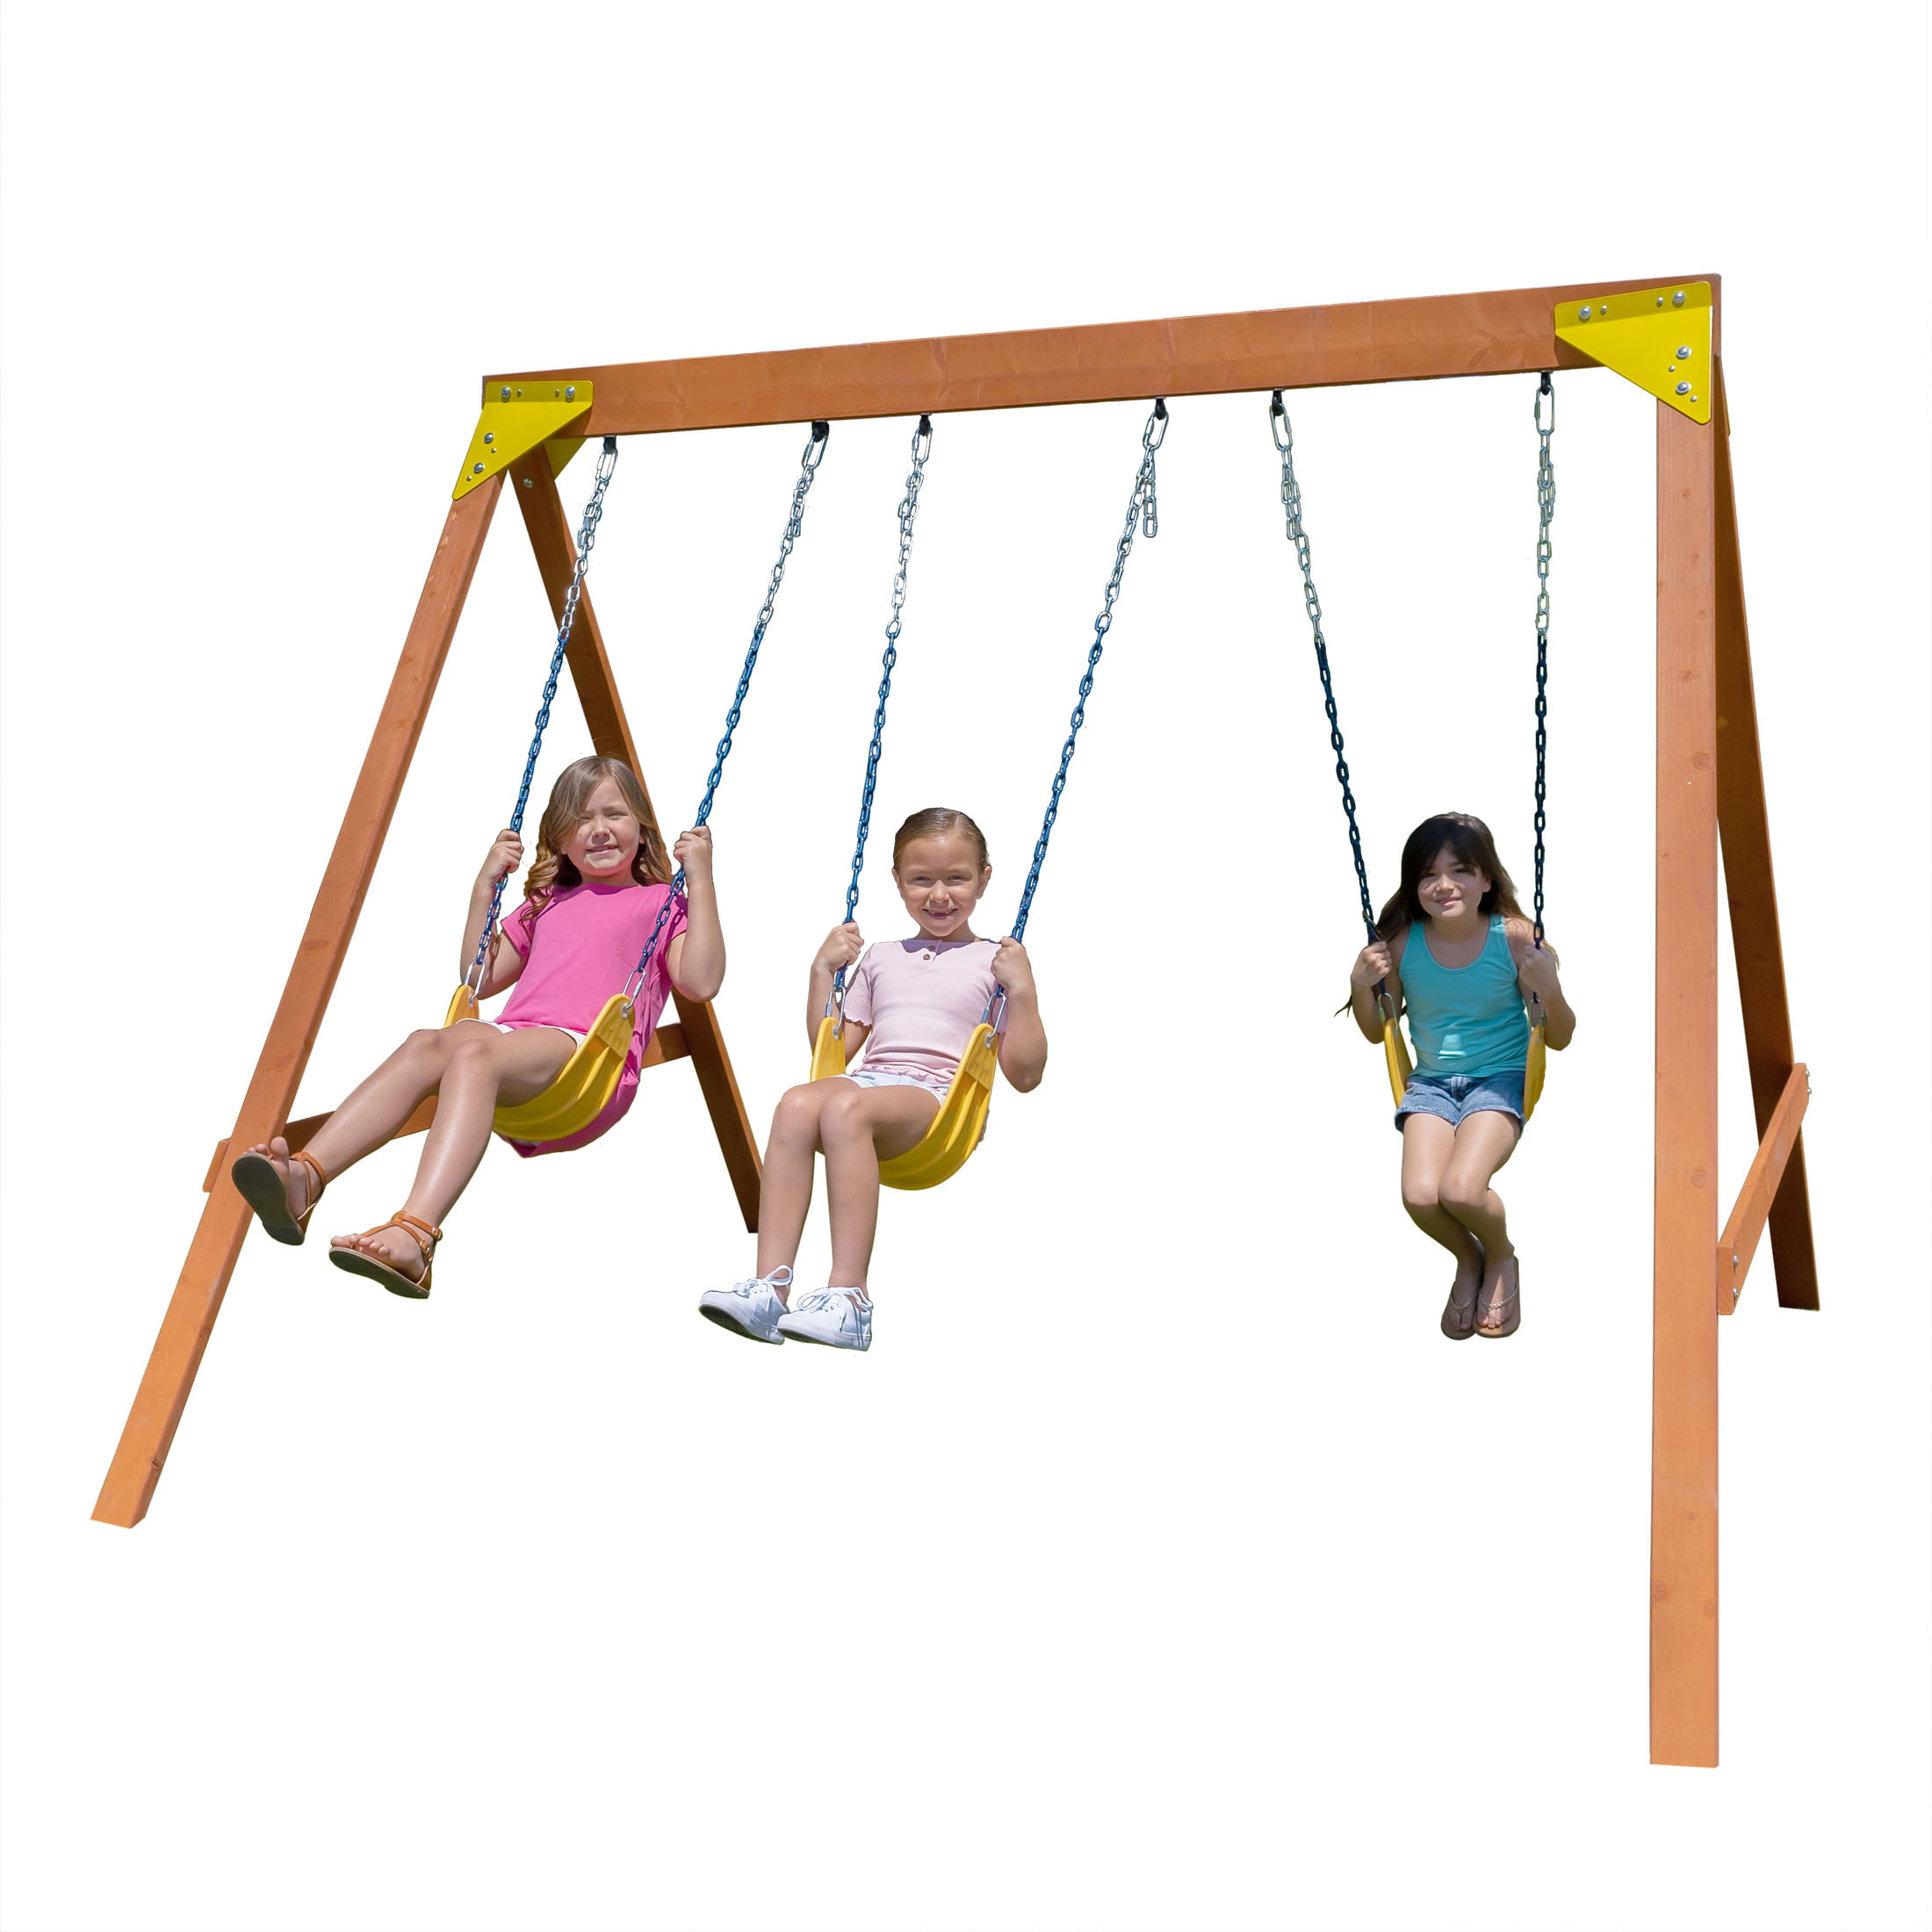 Kids Wrap Around Swing Flexible Seat for Outdoor Swing Sets Climbing Frames 